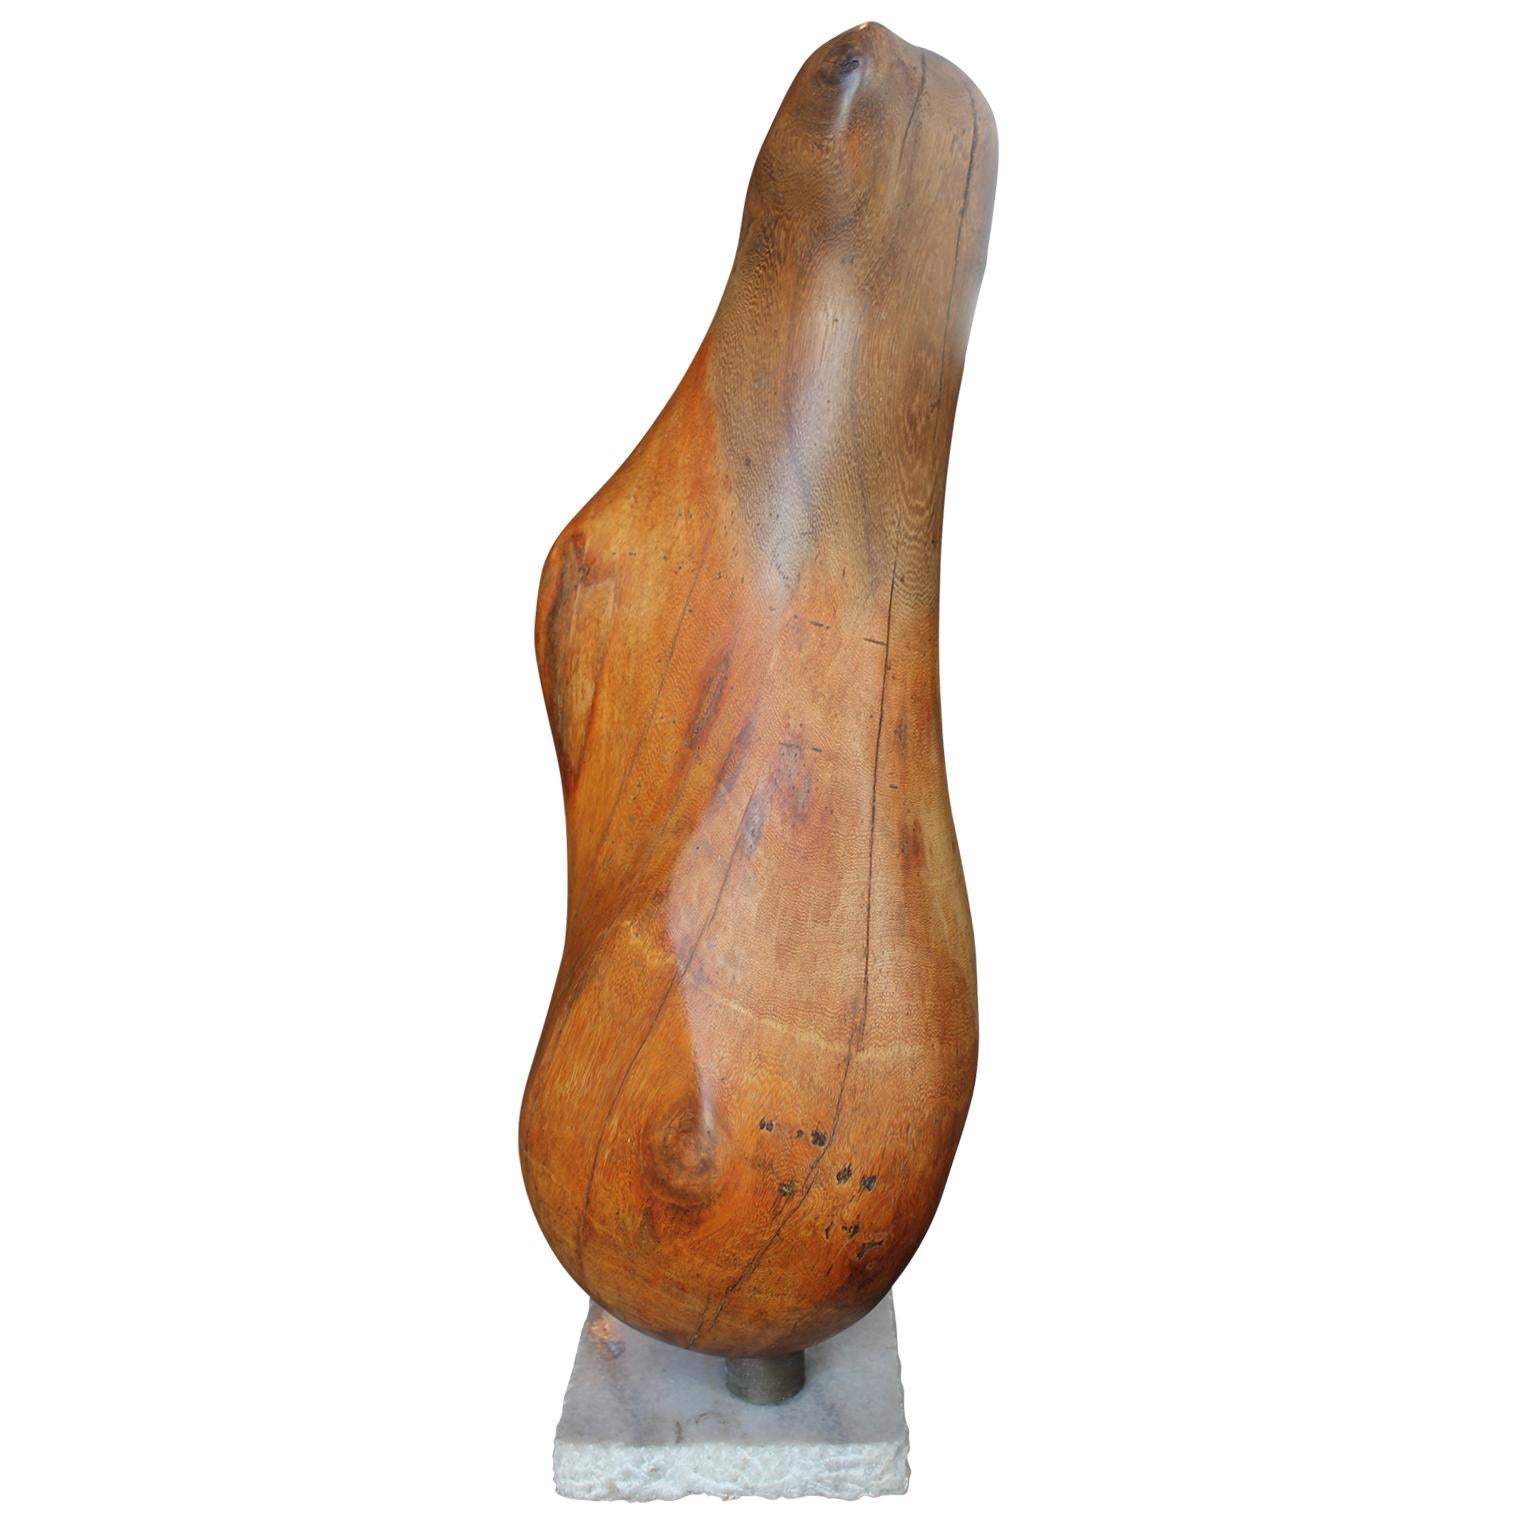 Brazilian Biomorphic Fruit Wood Sculpture with Marble Base - Brown Abstract Sculpture by Unknown